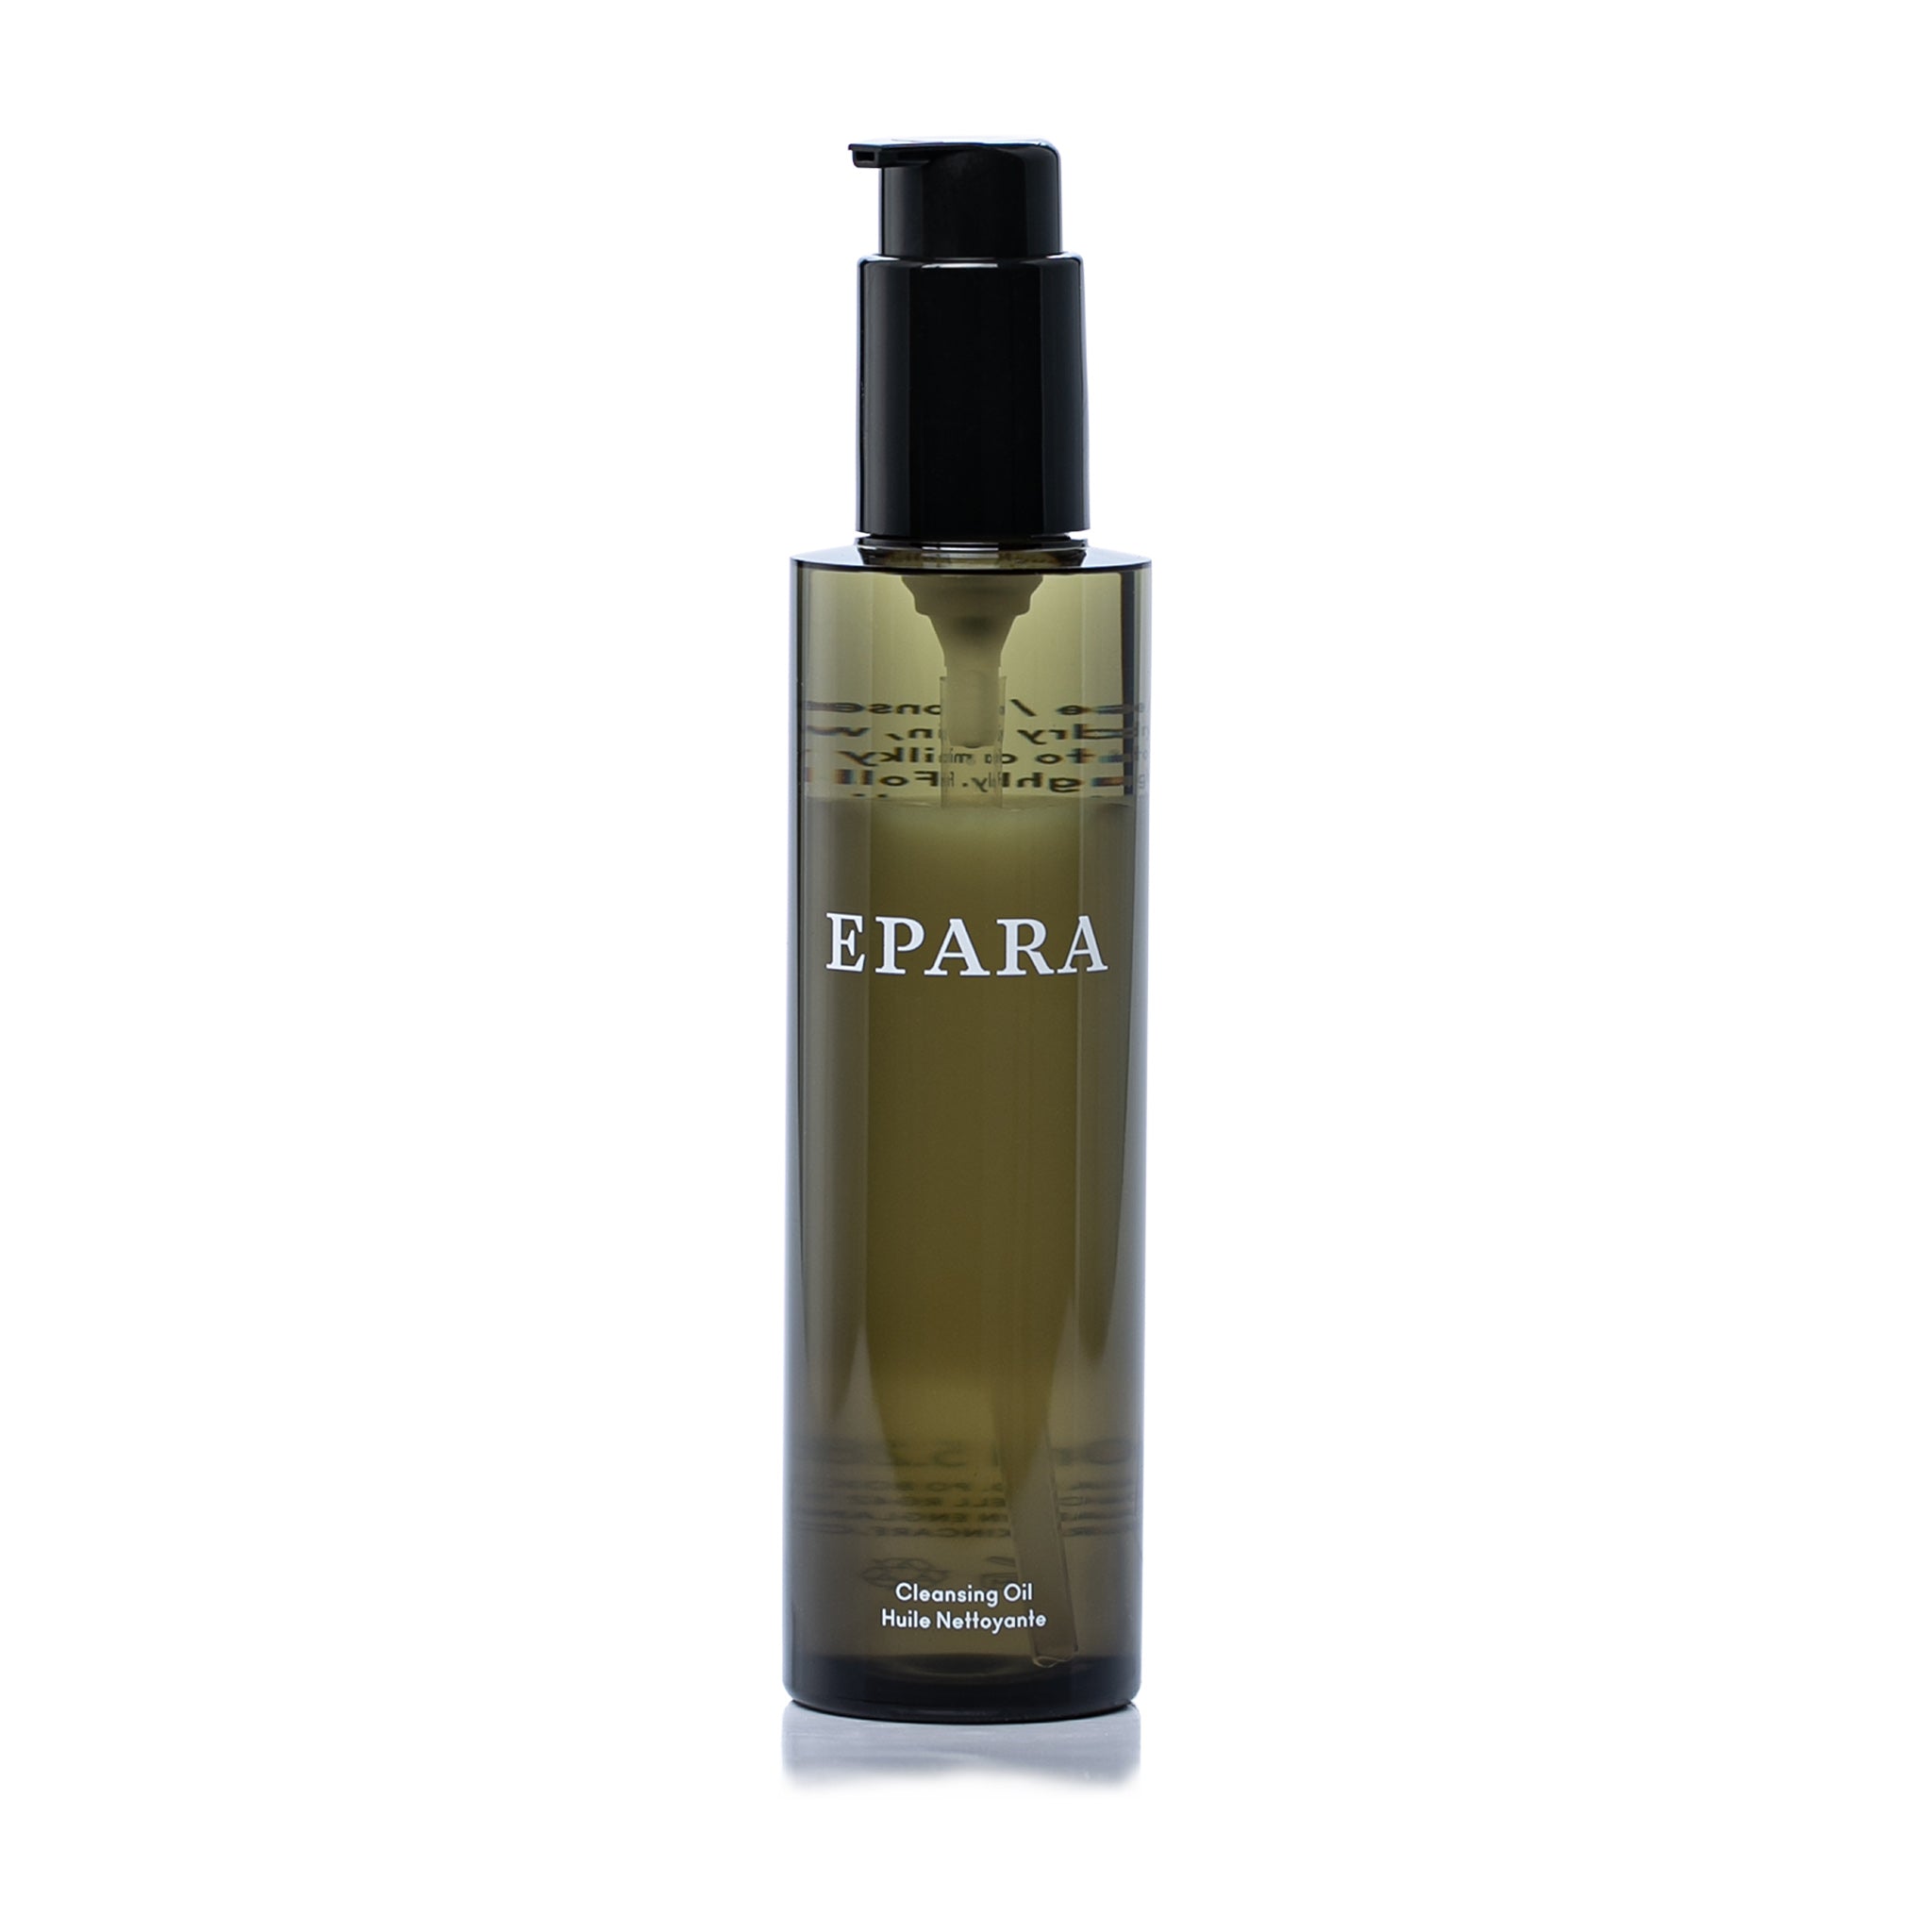 Epara cleansing oil at Bracketts Beauty